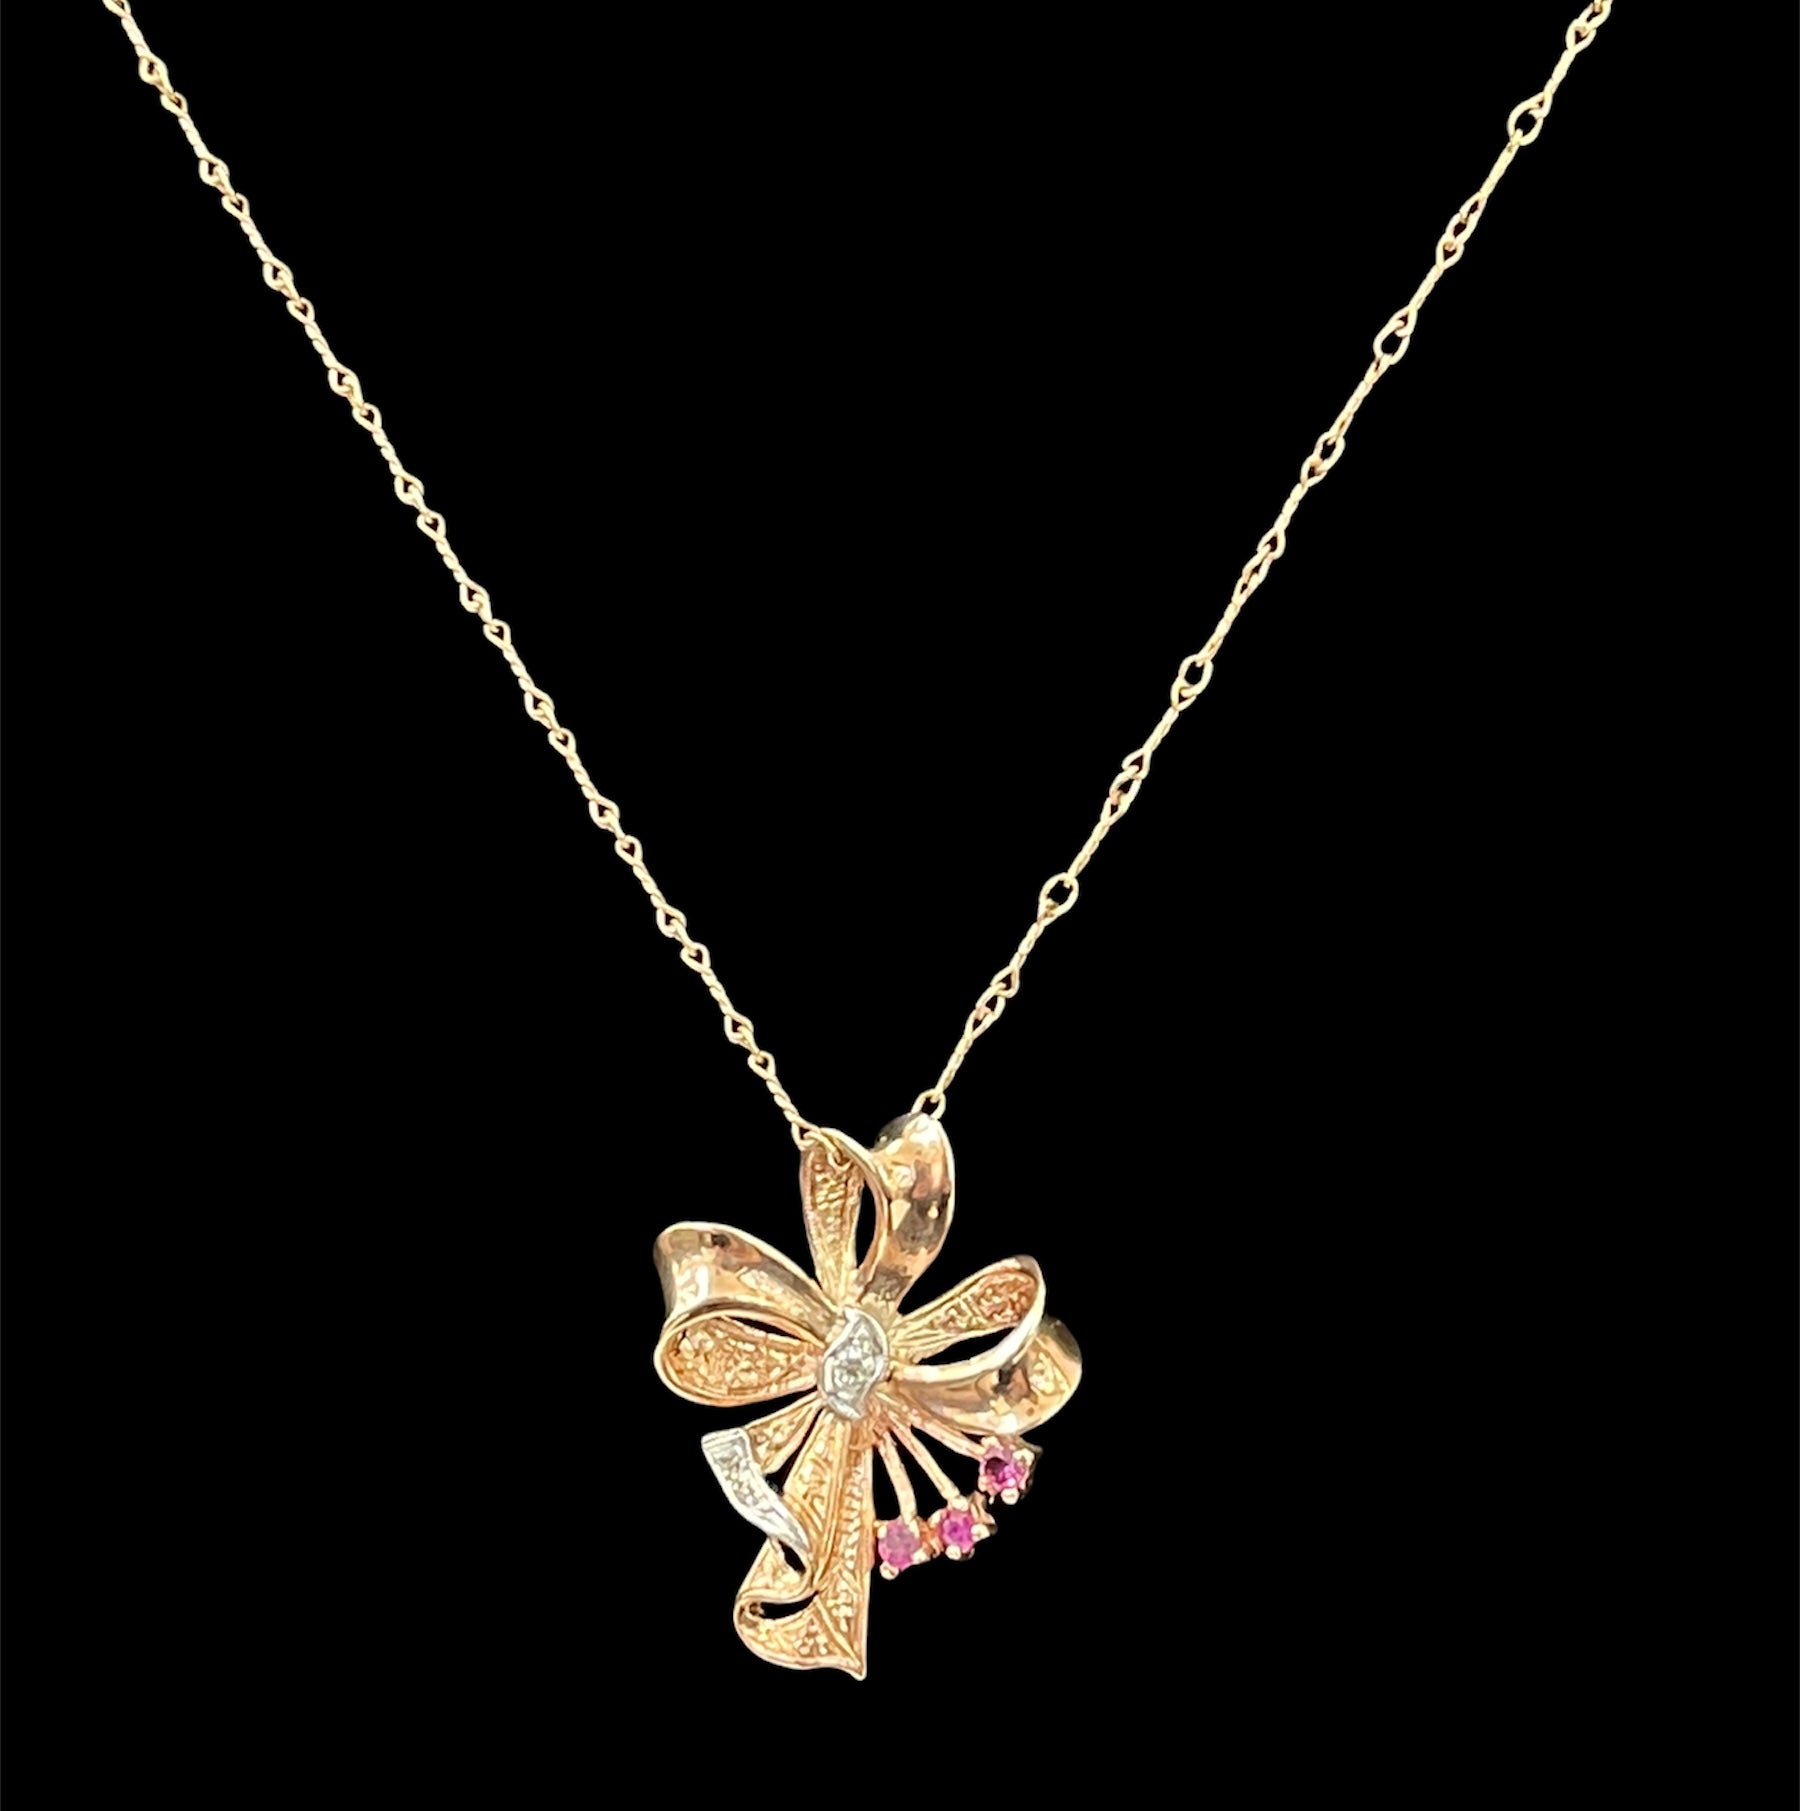 Pendant Chain Necklace With Diamonds and Gems Accents Rose Gold